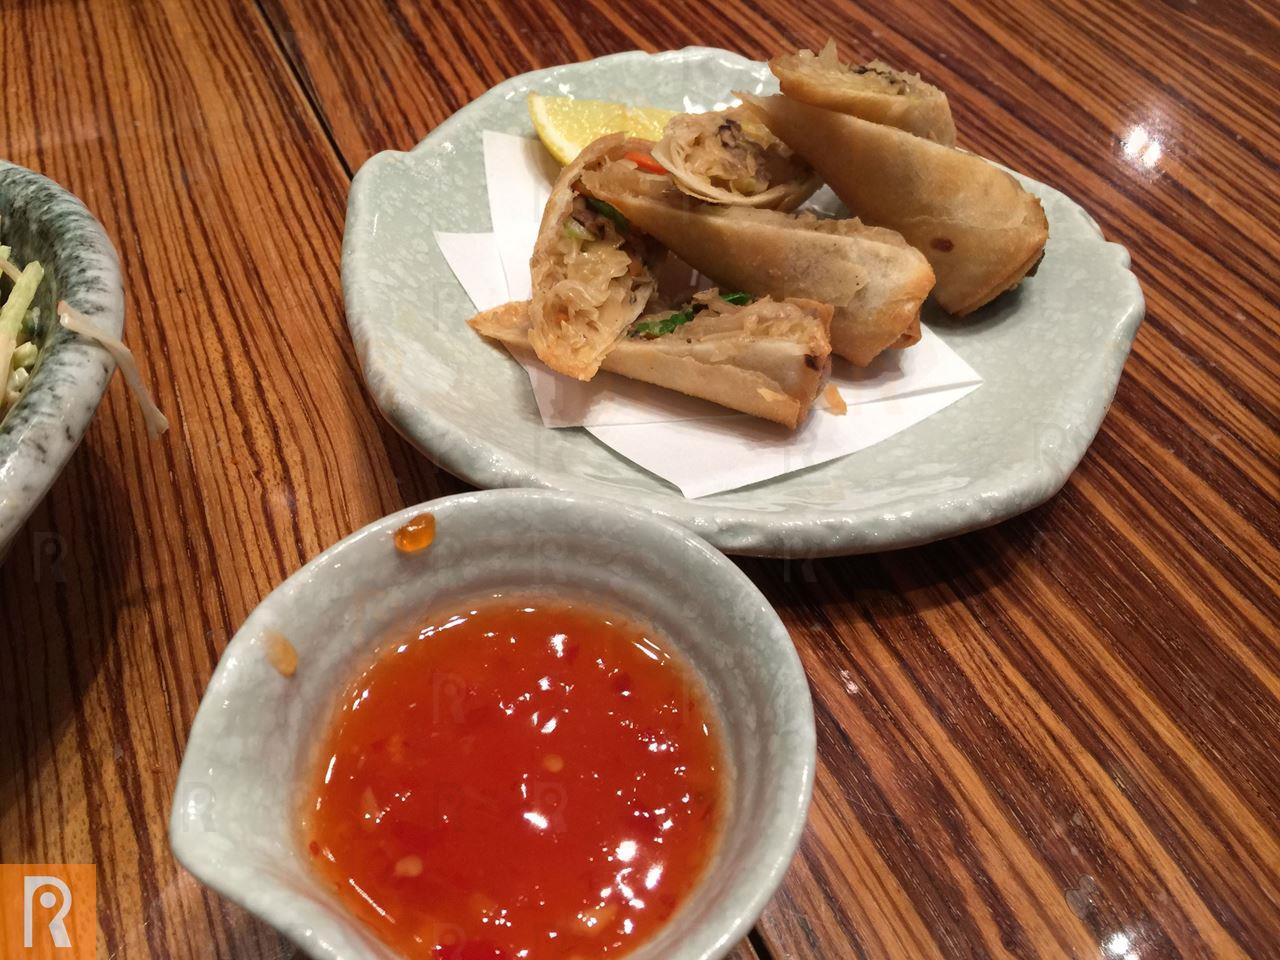 Yasai Spring Rolls with sweet chili sauce ... price is KD 2.750